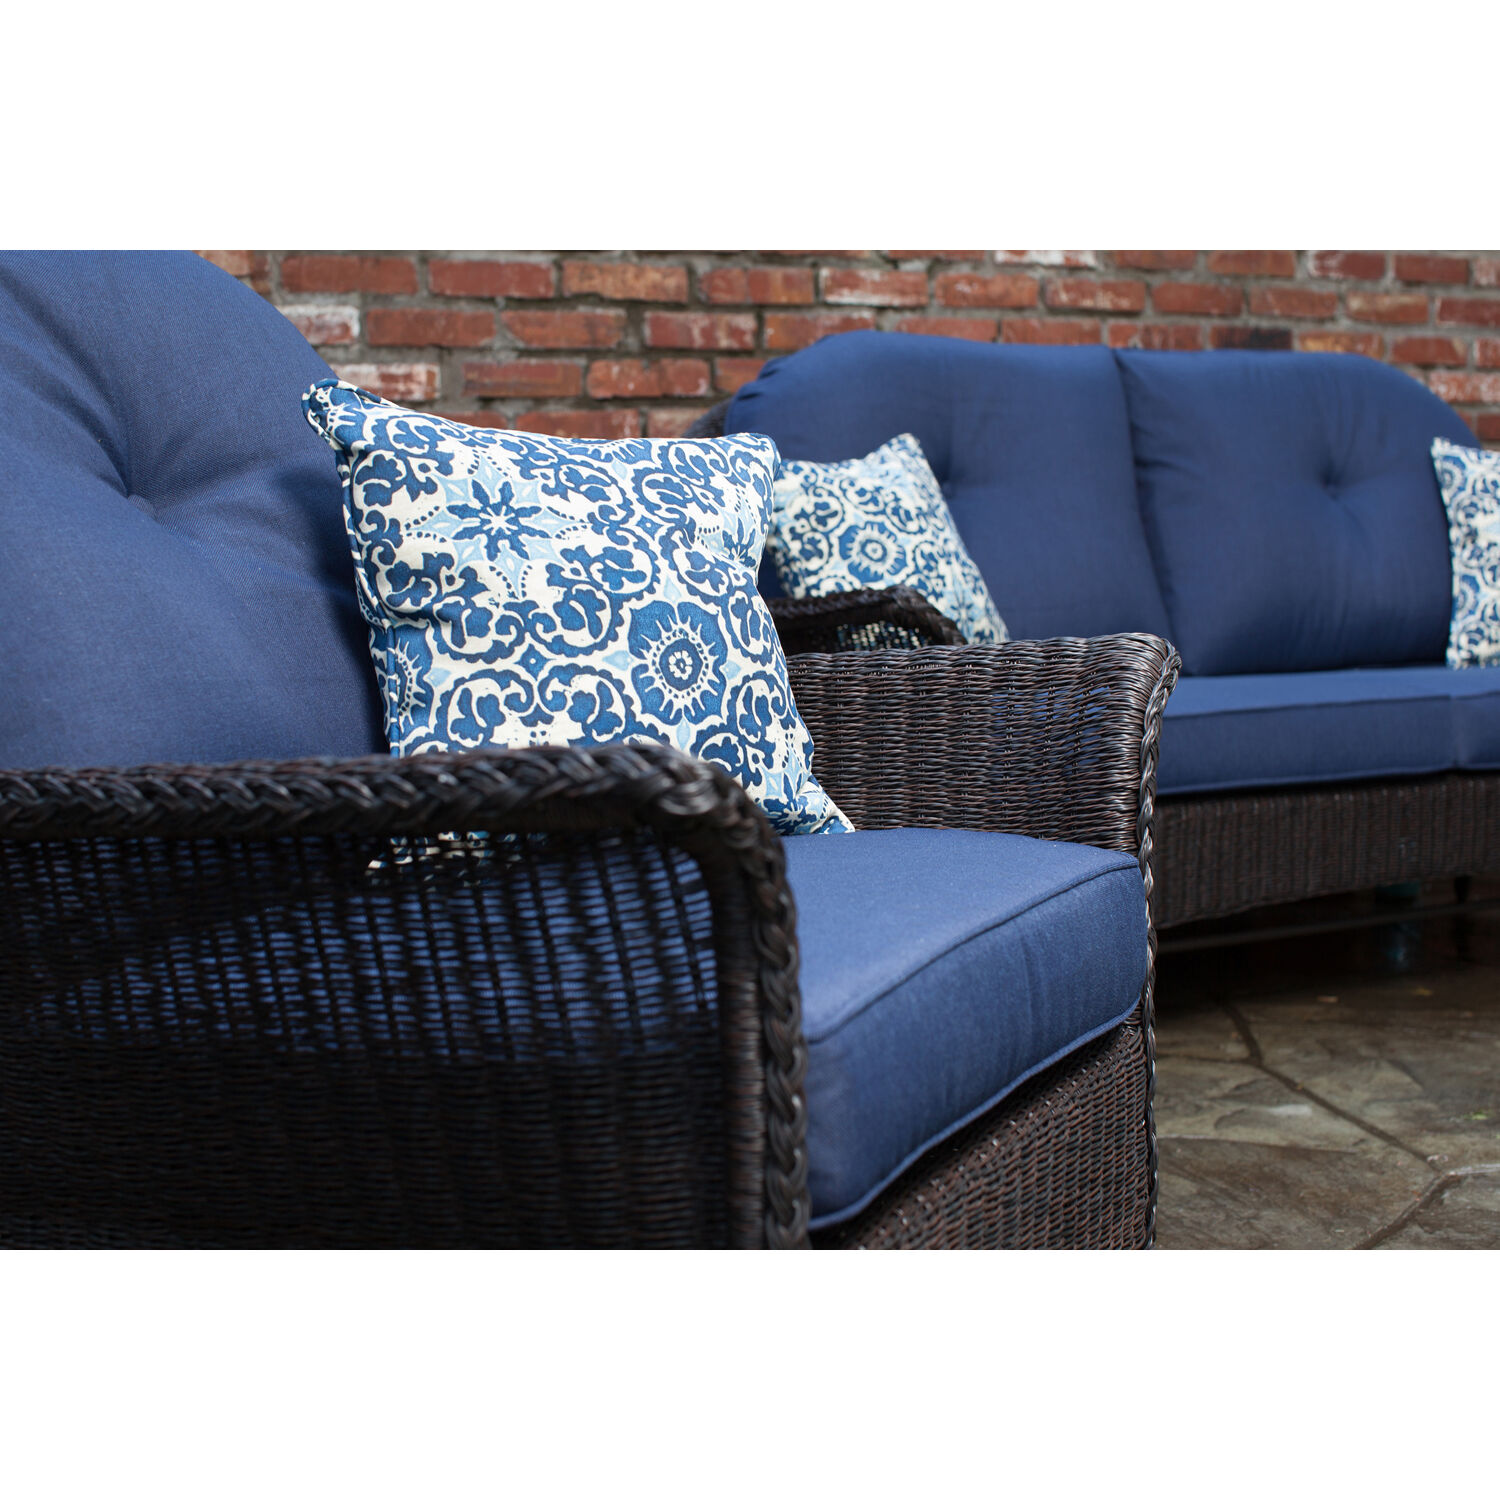 Hanover Sun Porch 6-Pc. Resin Lounge Set w/ Handwoven Loveseat, 2 Armchairs, 2 Ottomans, Coffee Table and Plush Navy Blue Cushions - image 4 of 14